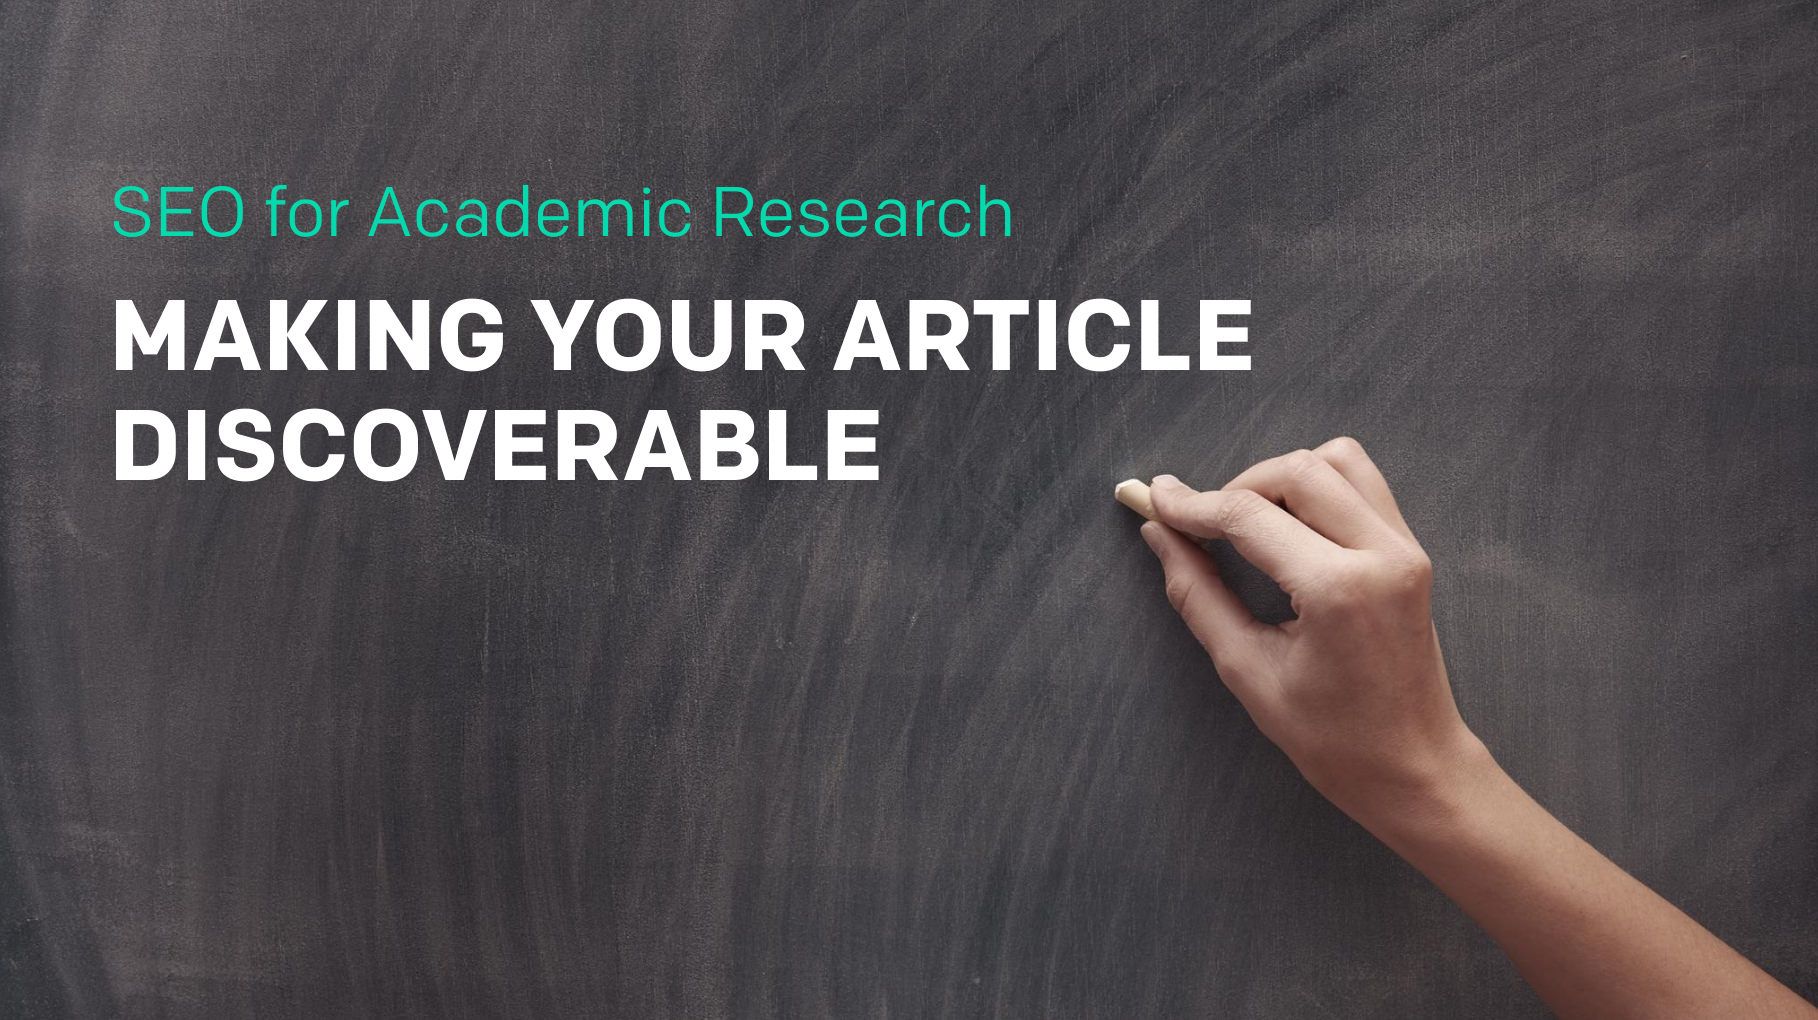 SEO for Academic Research: Making your Article Discoverable